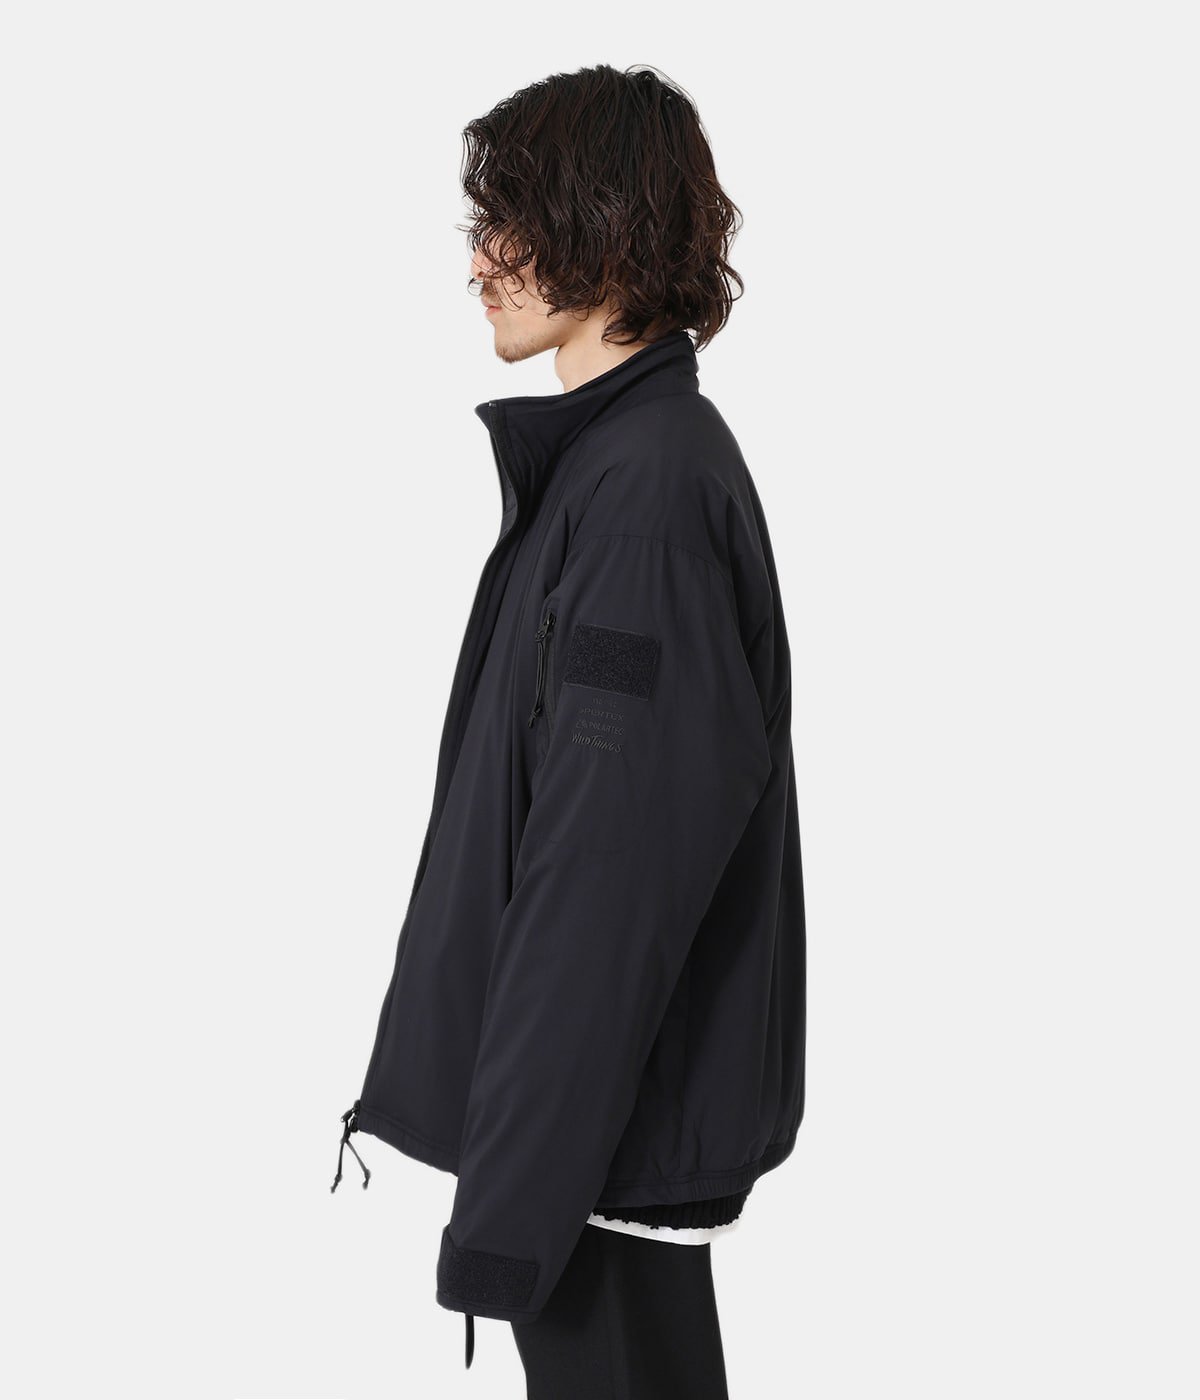 【ONLY ARK】別注 WILD THINGS LOW LOFT JACKET - partex shield 3layer nylon rip  stop -